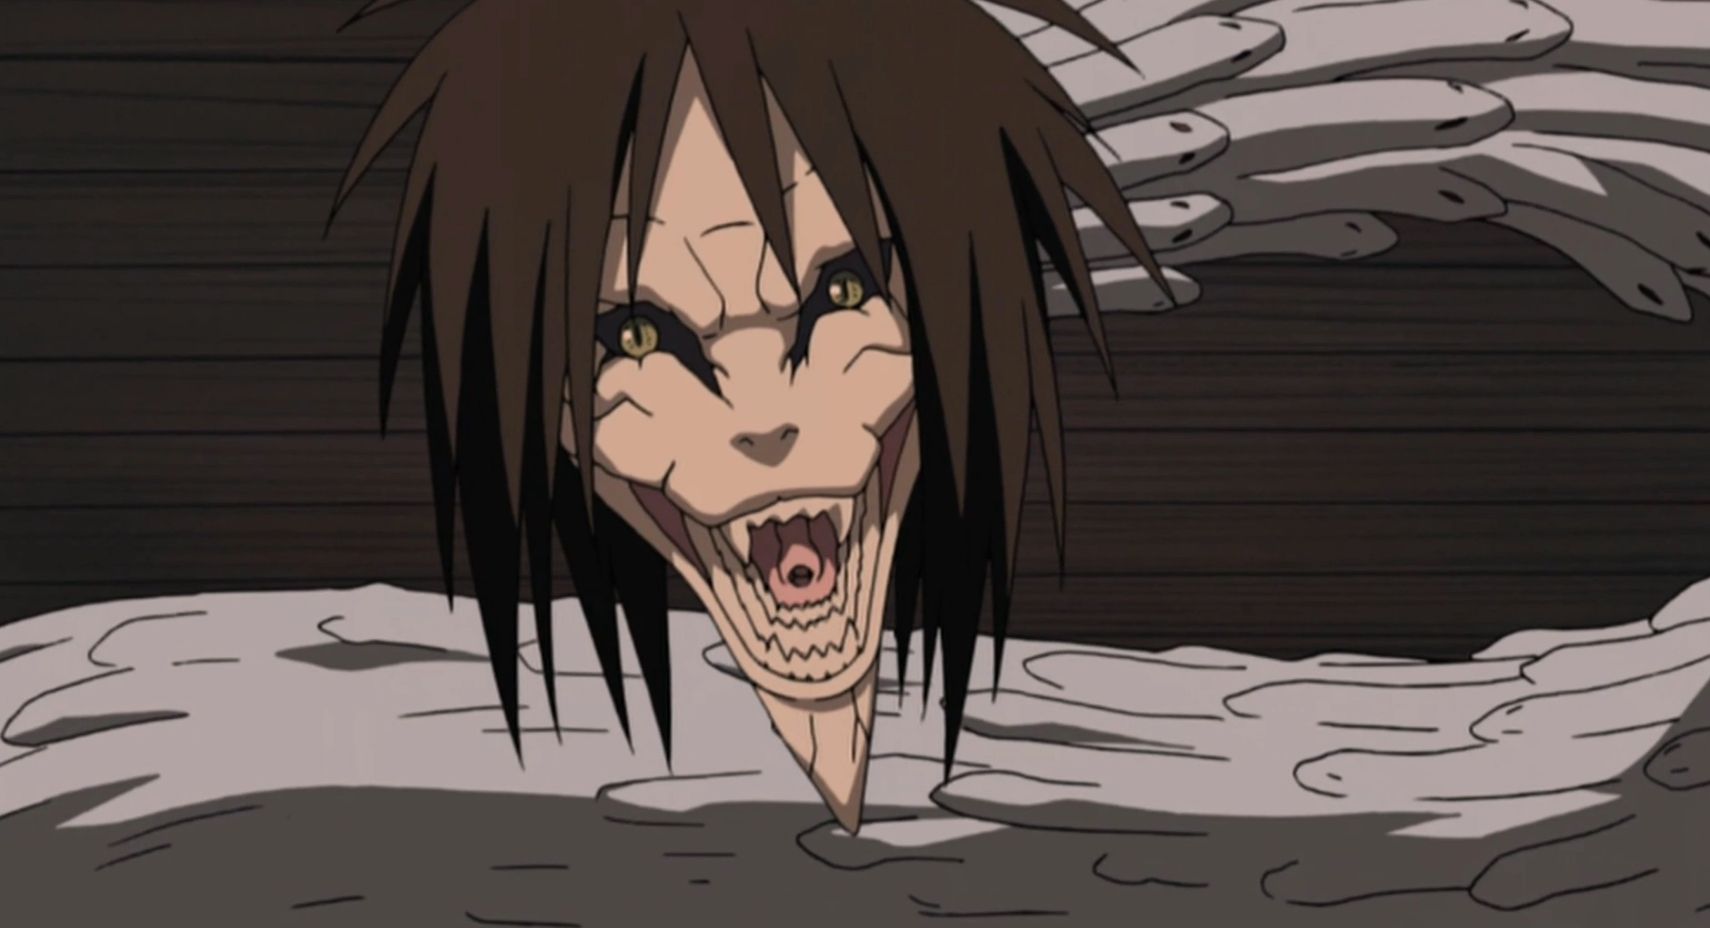 Naruto 25 Crazy Things About Orochimaru’s Body